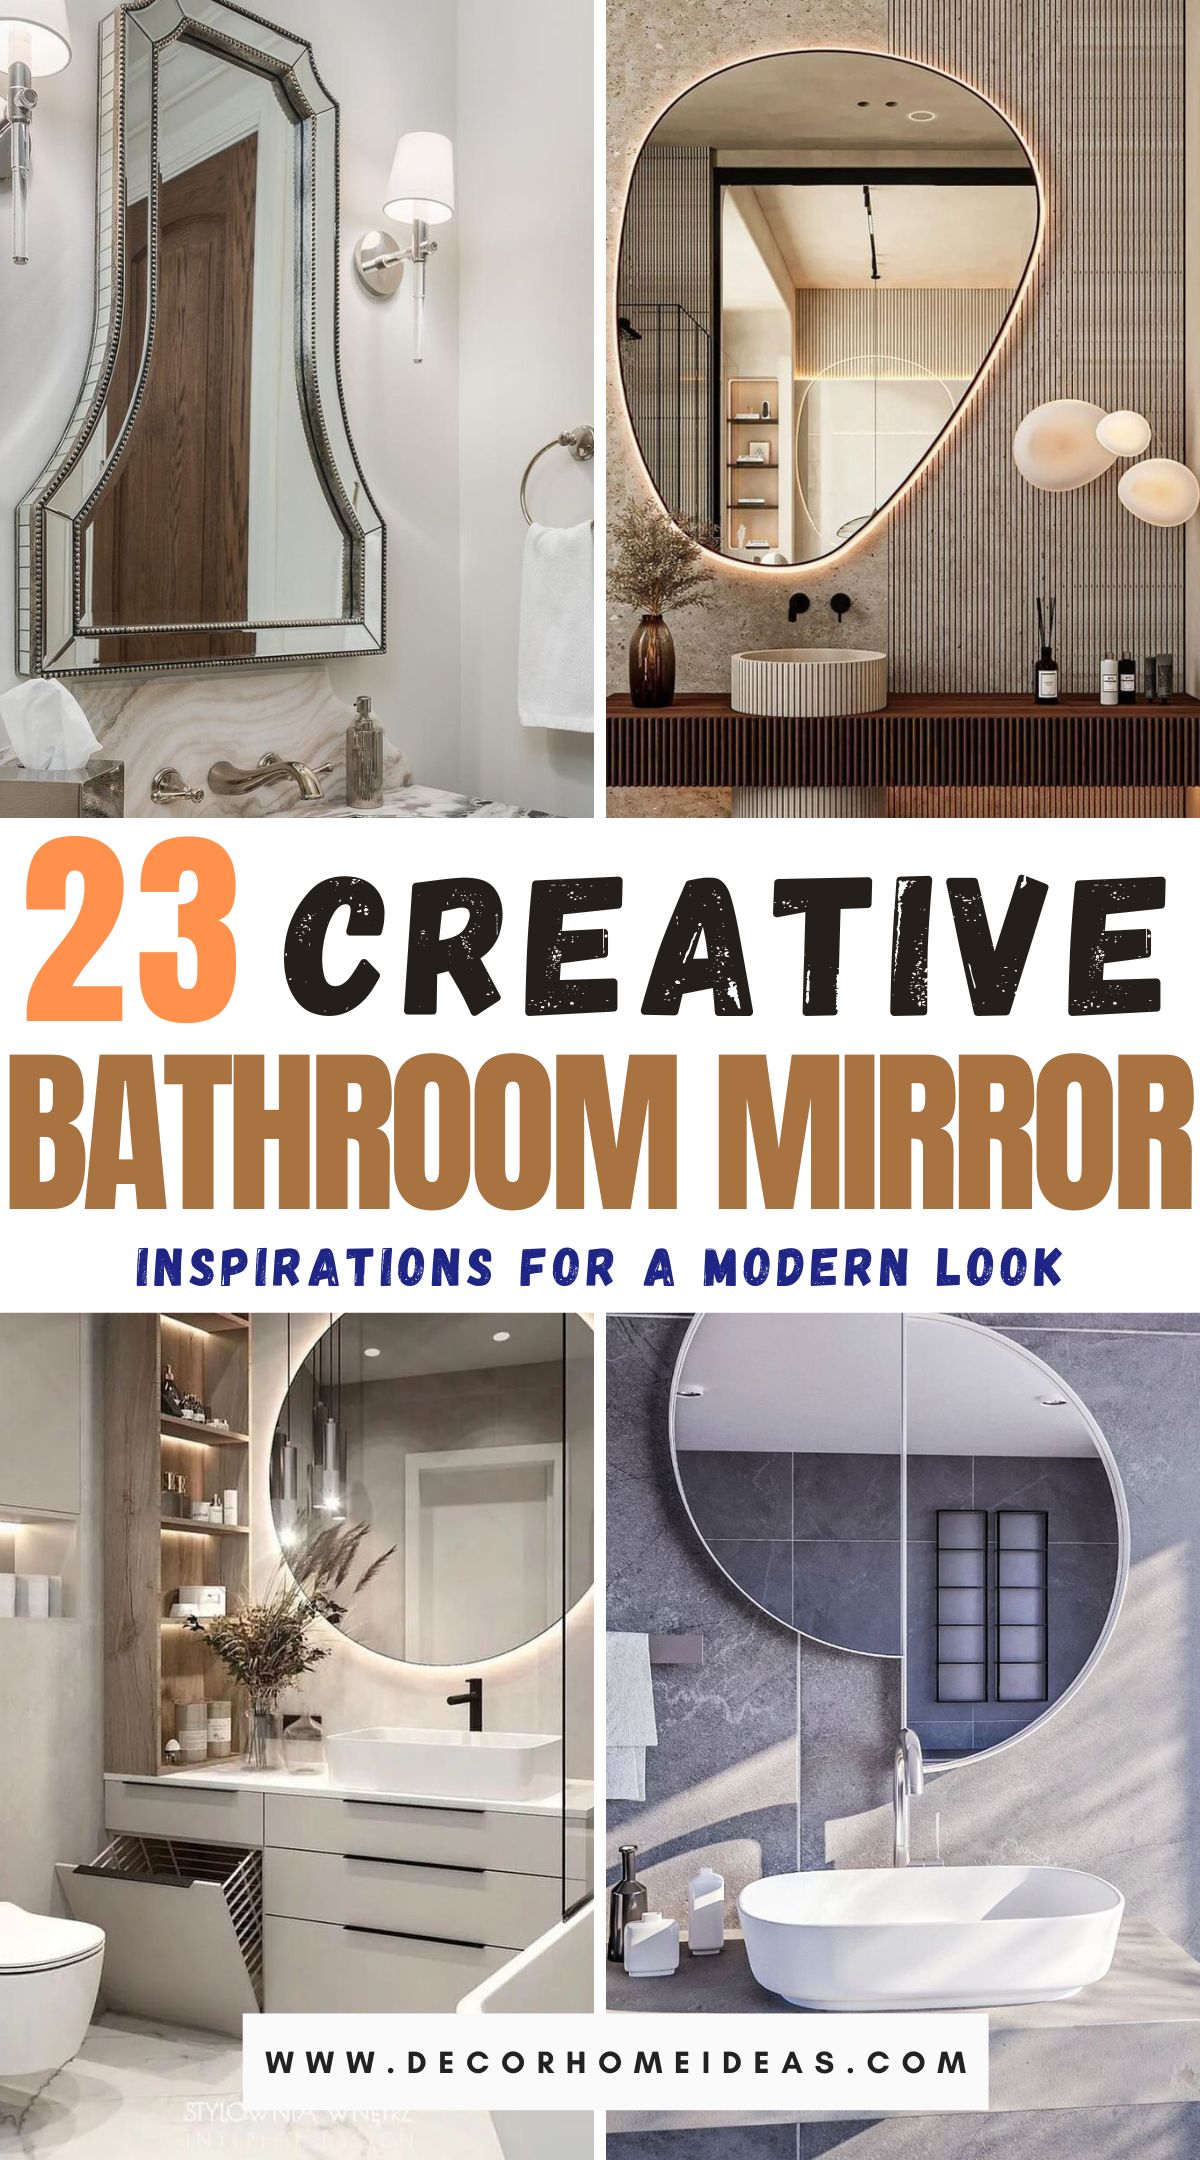 Refresh your space with these 23 innovative bathroom mirror ideas. From statement frames to smart lighting solutions, explore creative ways to elevate your bathroom decor and add style and functionality to your daily routine.